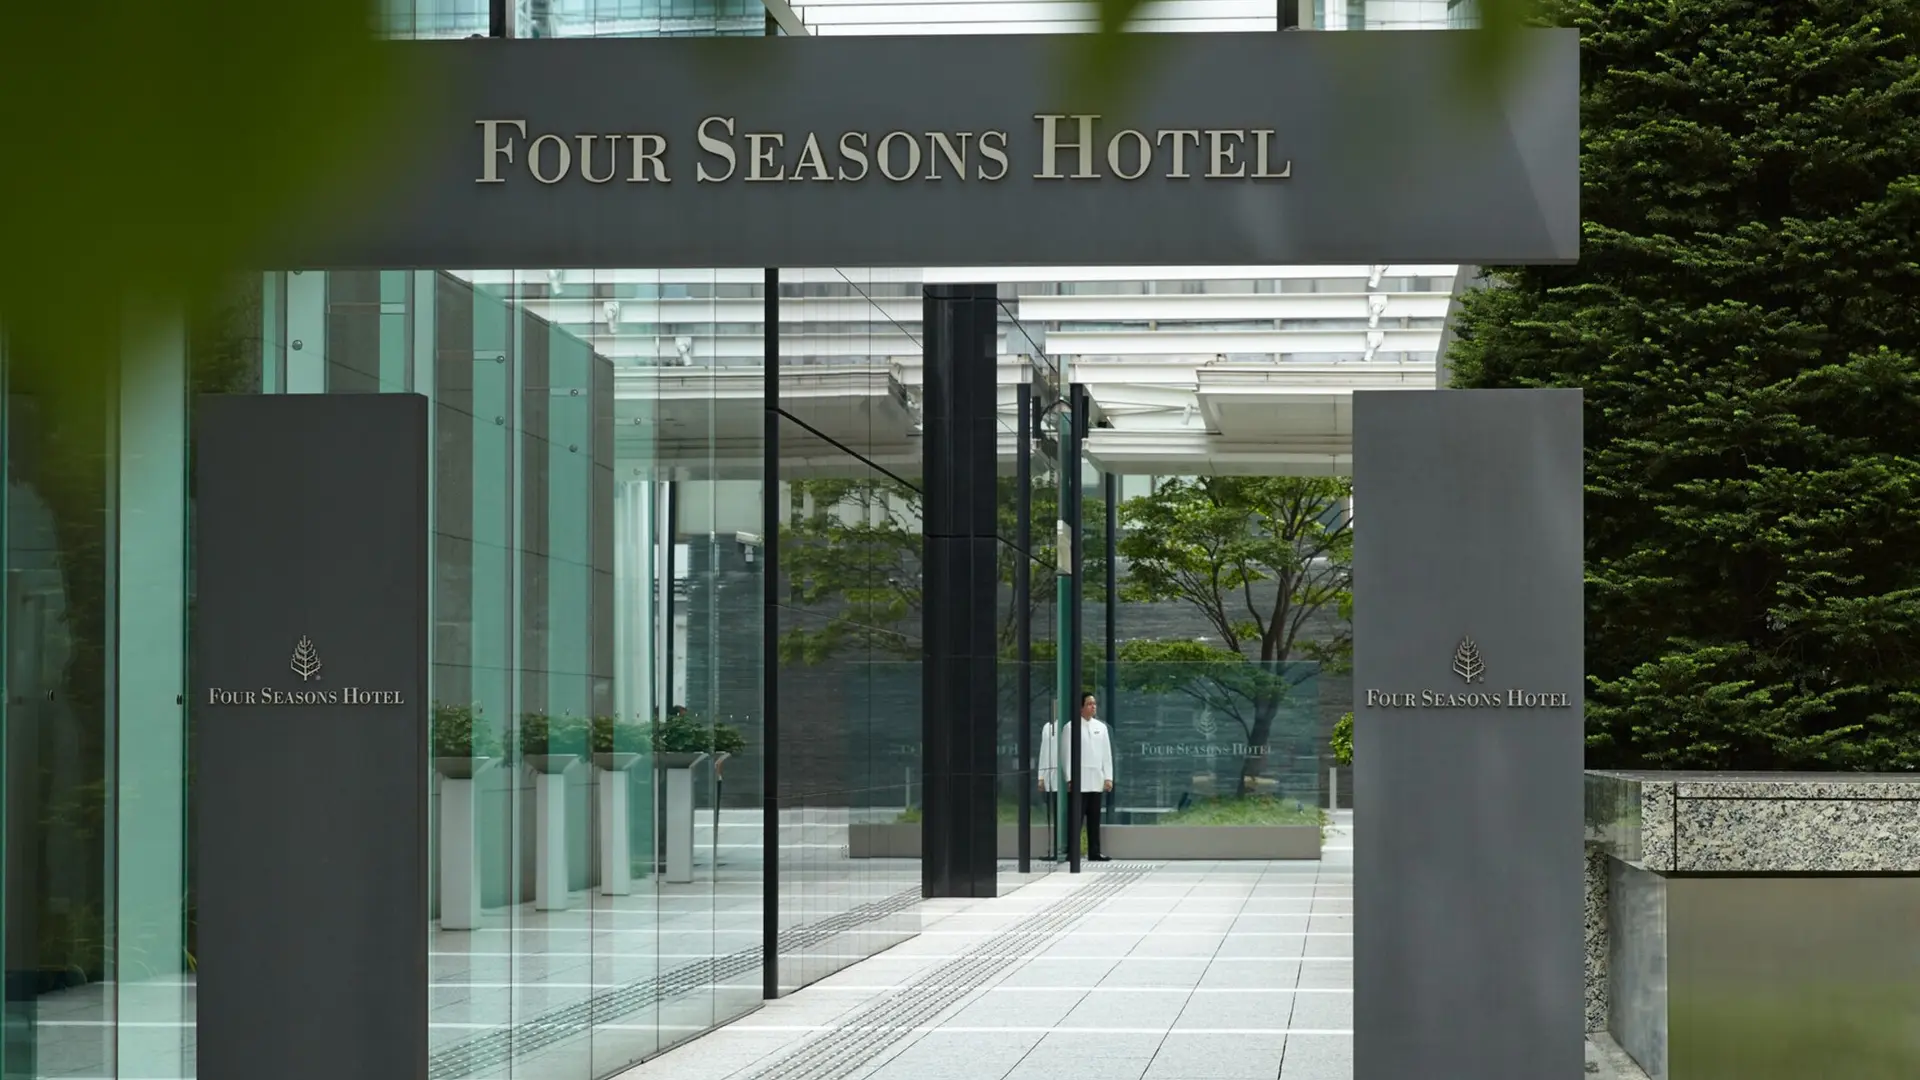 Four seasons hotel at Tokyo, grey and white entrance design with futuristic decor.